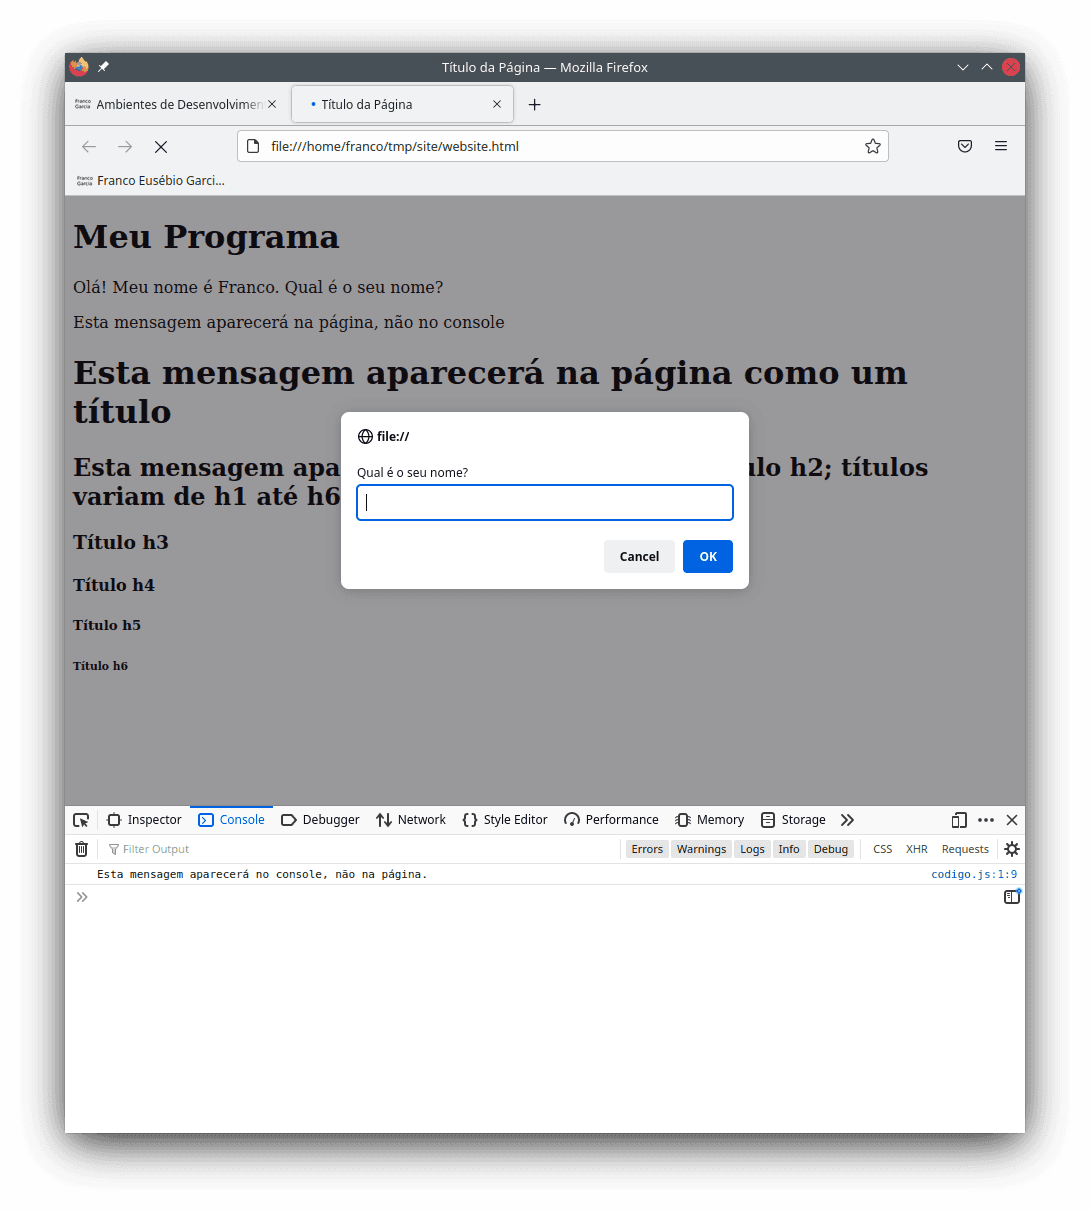 The Portuguese version of the new page with further uses of `add_element()`. The image displays the request for the user's name.